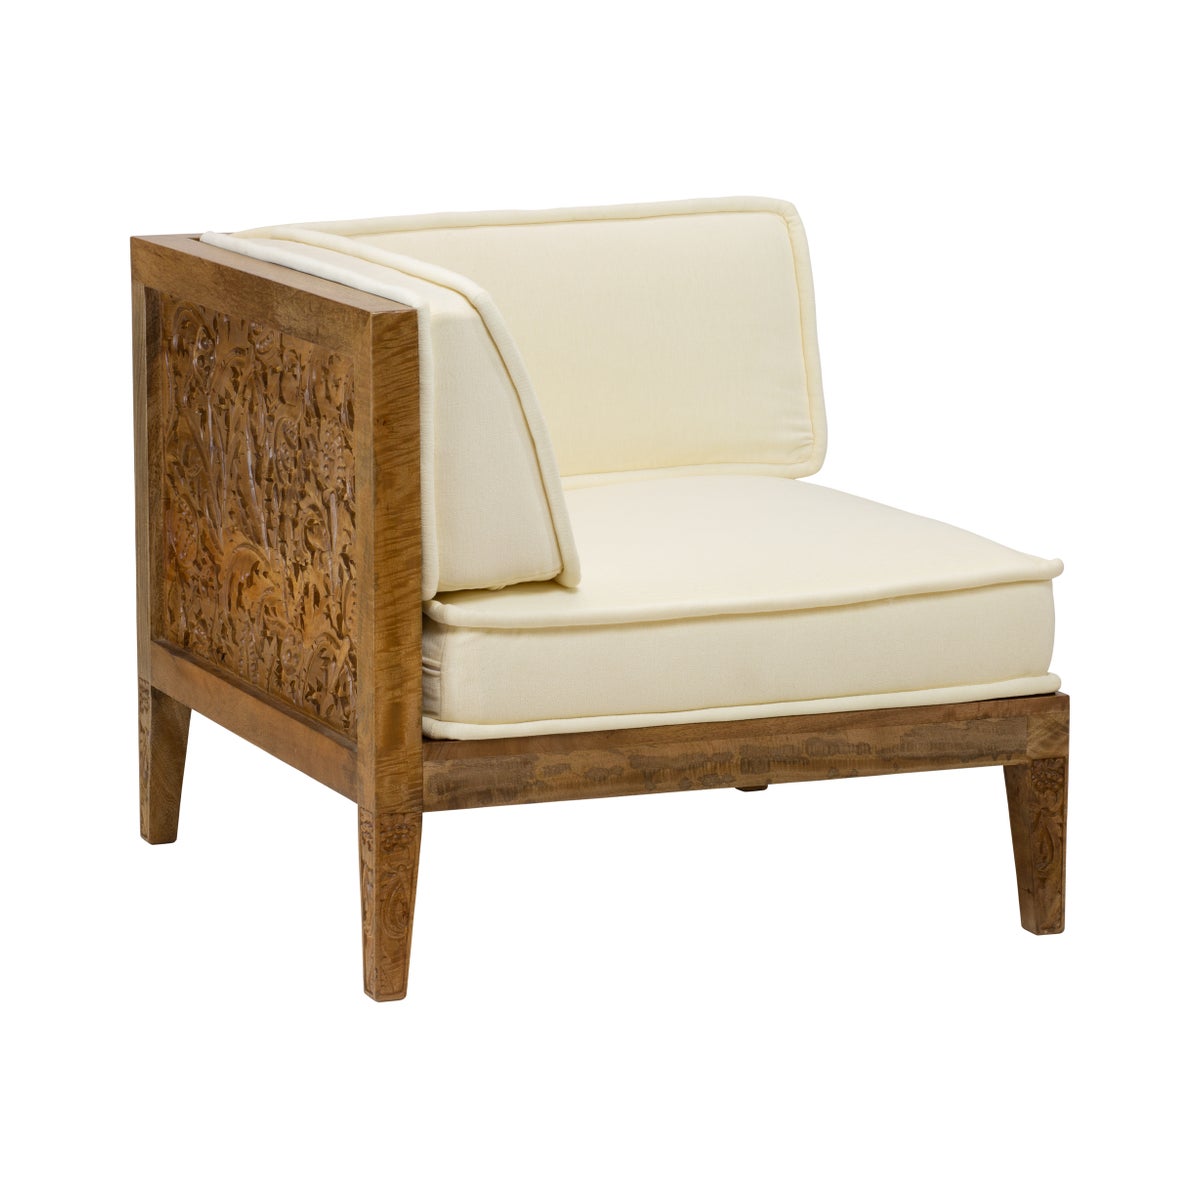 Thistle Corner Chair in Natural